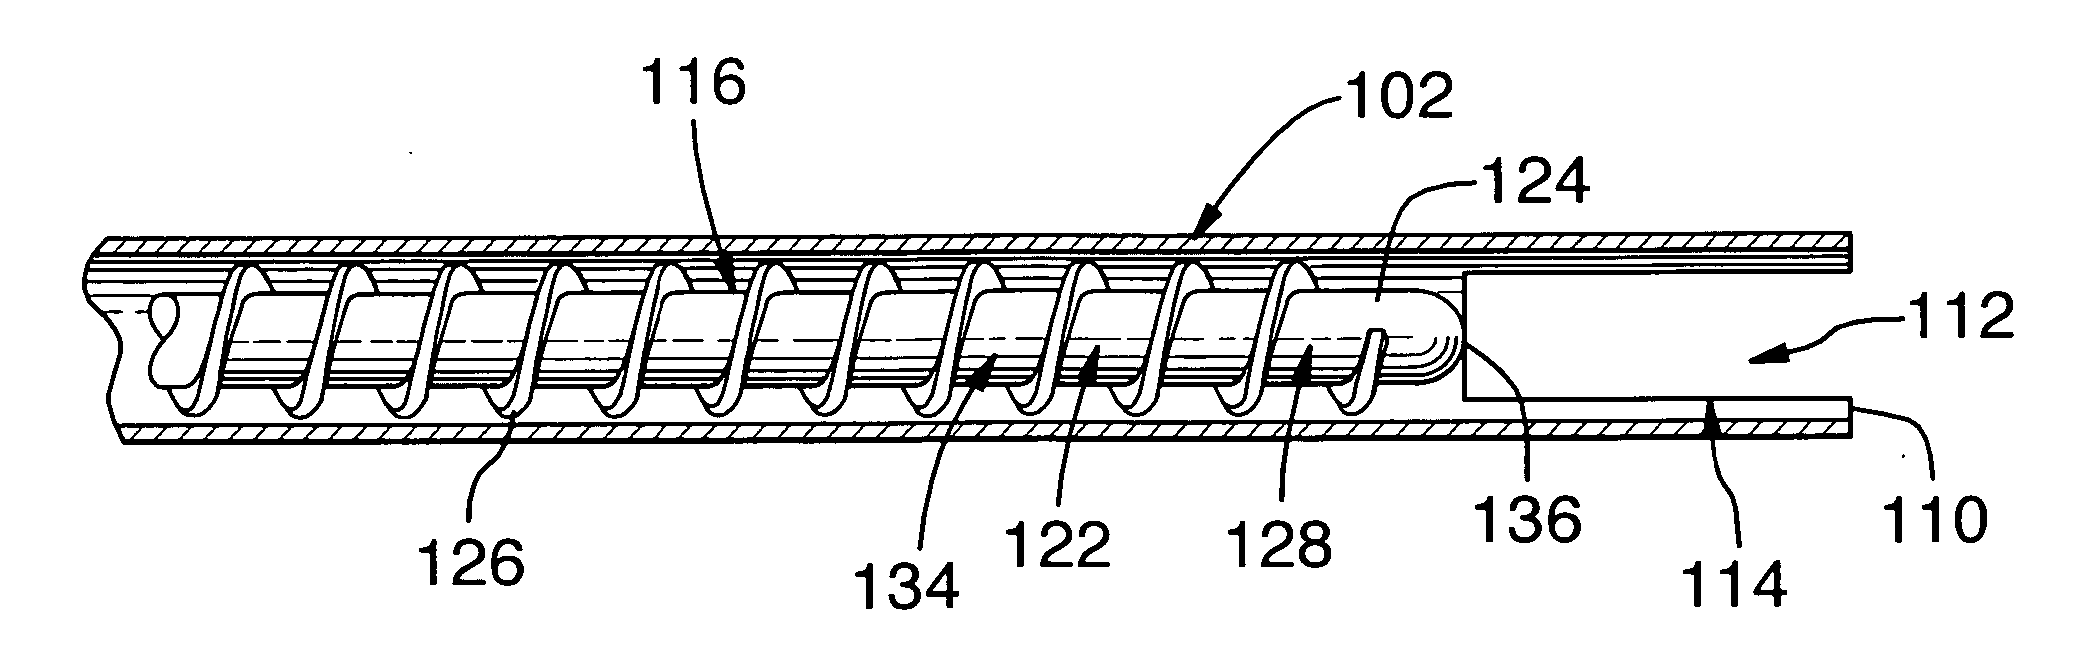 Method for removing material from a patient's body